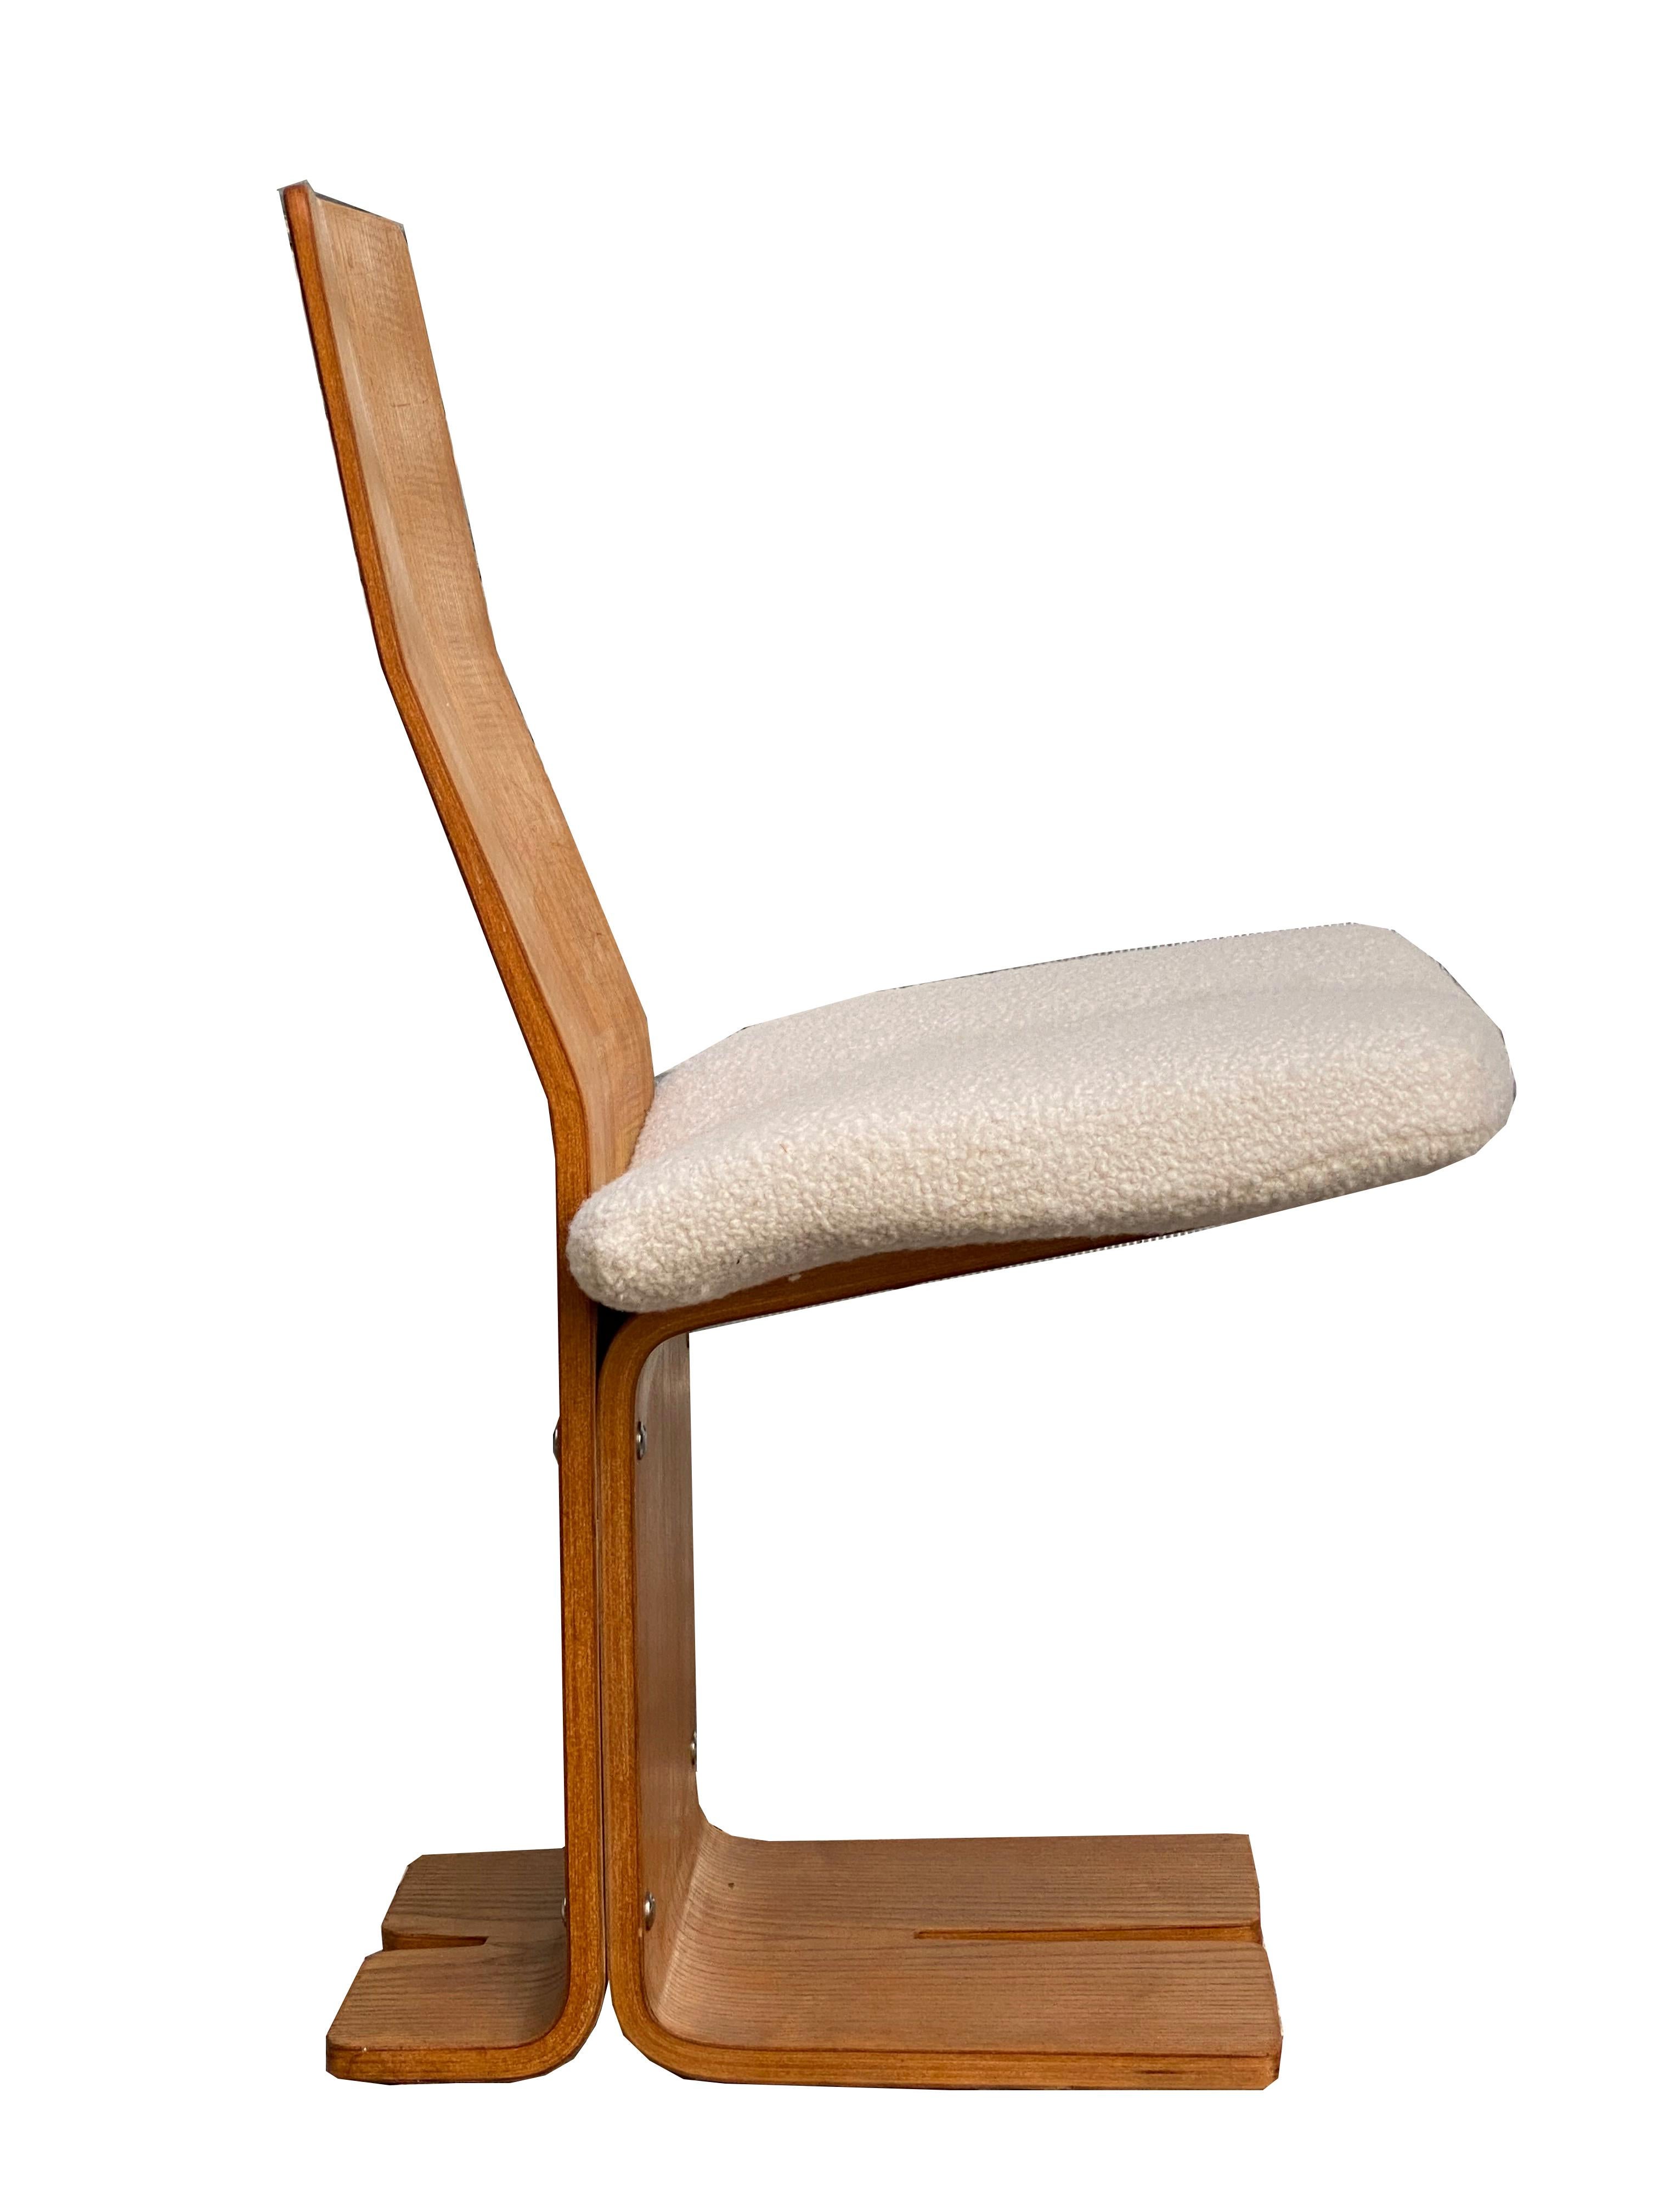 Beech wood chair and boucle' fabric seat with original Rima Padova label from 